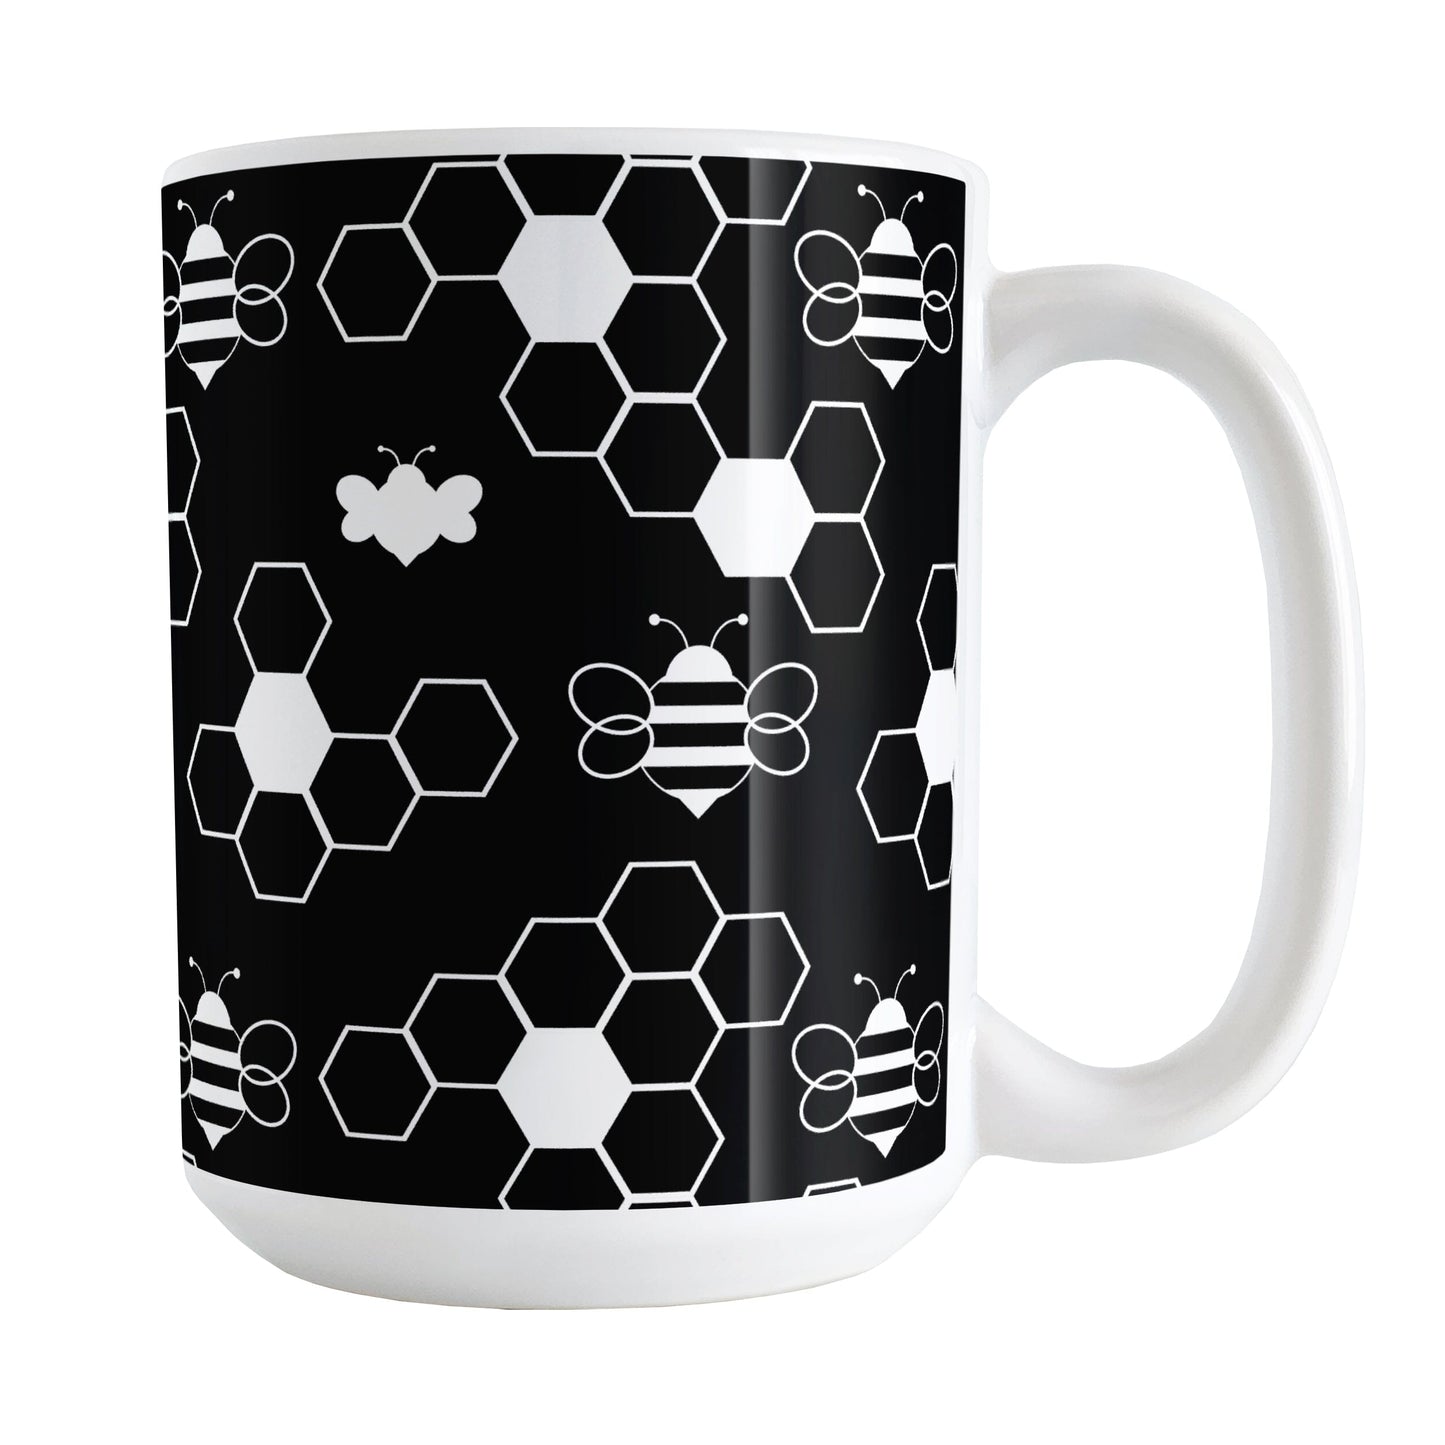 Black and White Bee Mug (15oz) at Amy's Coffee Mugs. A ceramic coffee mug designed with white line and silhouette bees and honeycomb in a sleek pattern over a black background color that wraps around the mug up to the handle.